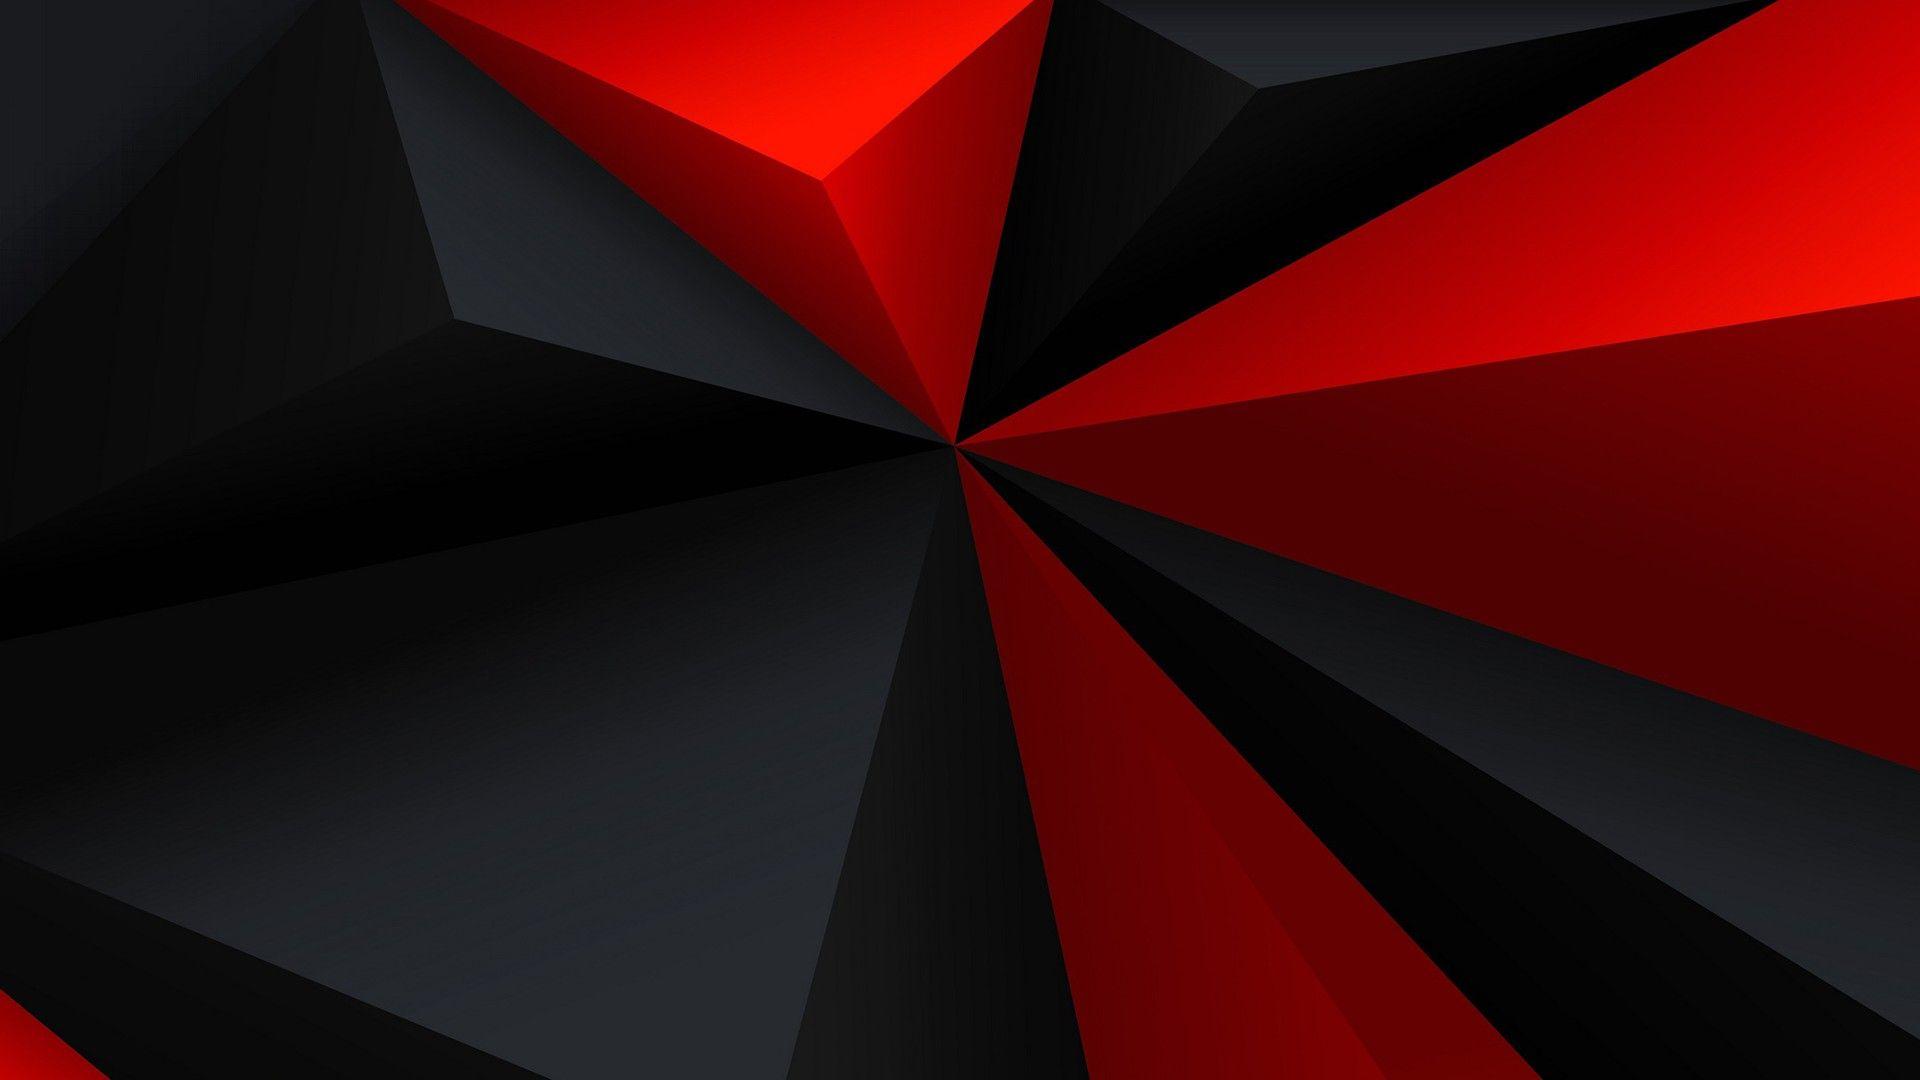 digital Art, Minimalism, Low Poly, Geometry, Triangle, Red, Black, Gray, Abstract Wallpaper HD / Desktop and Mobile Background